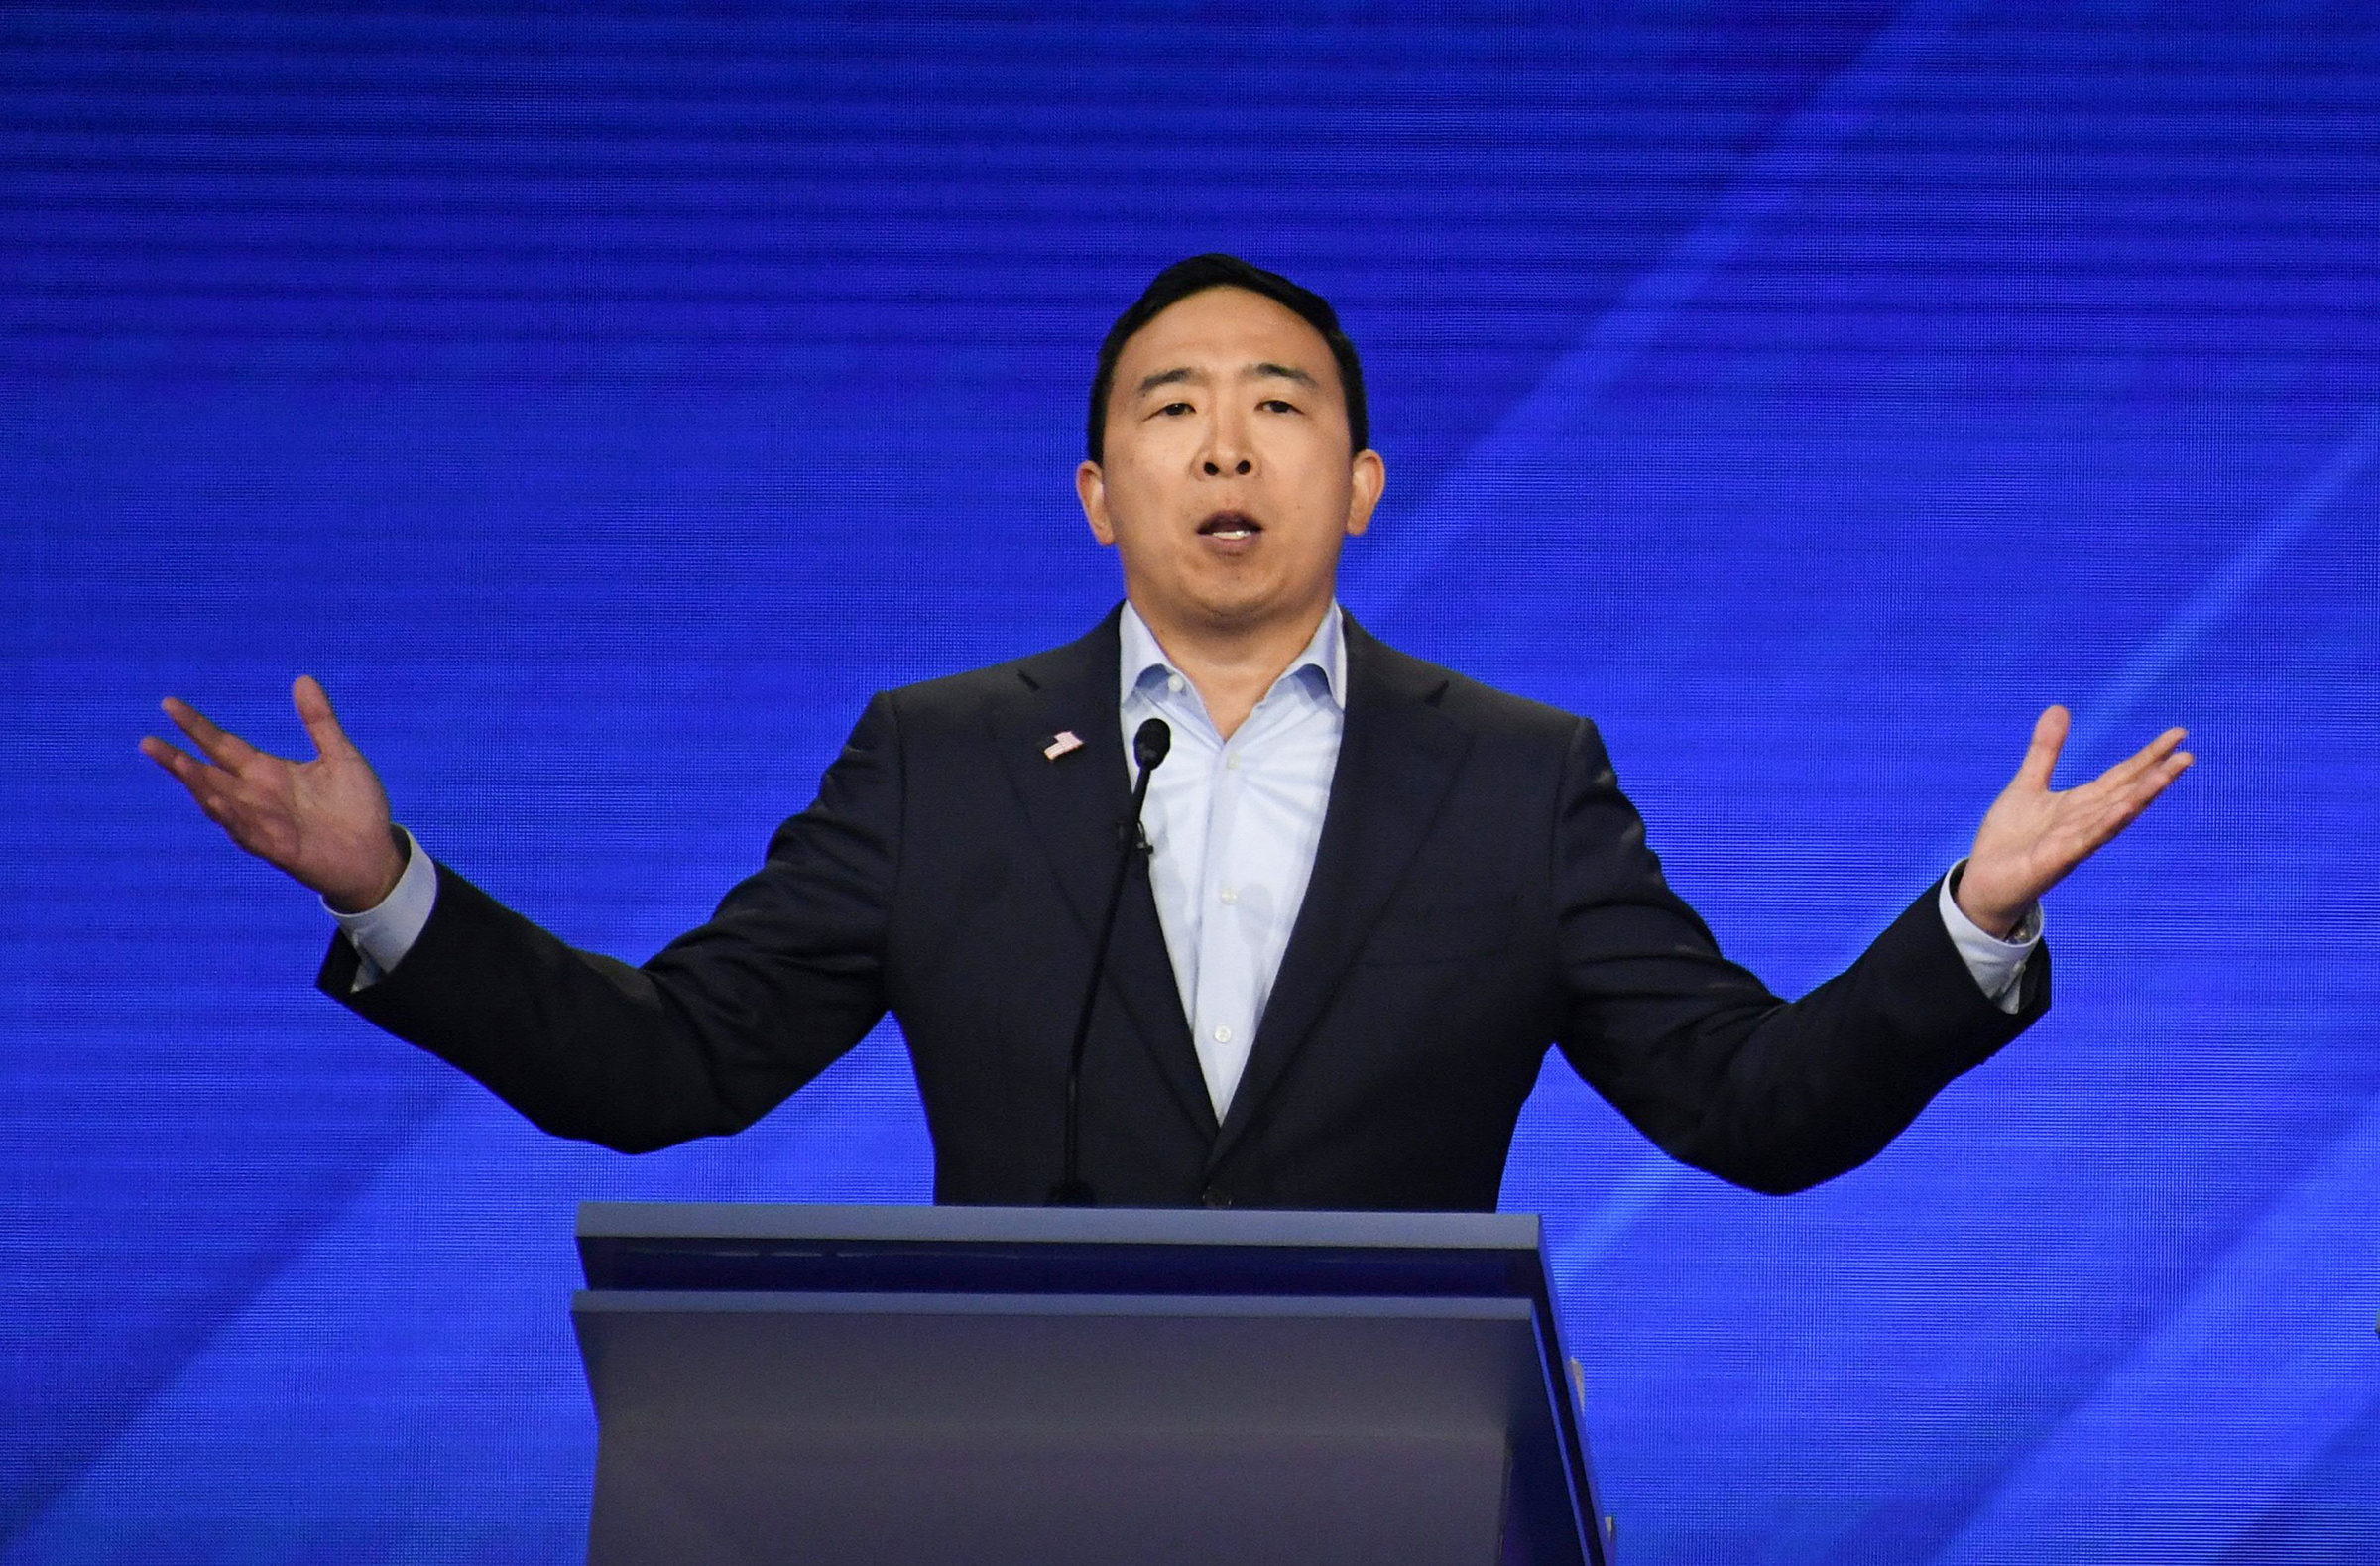 Democratic presidential hopeful Tech entrepreneur Andrew Yang speaks during the third Democratic primary debate of the 2020 presidential campaign season at Texas Southern University in Houston, Texas on September 12, 2019. (Robyn Beck—AFP/Getty Images)